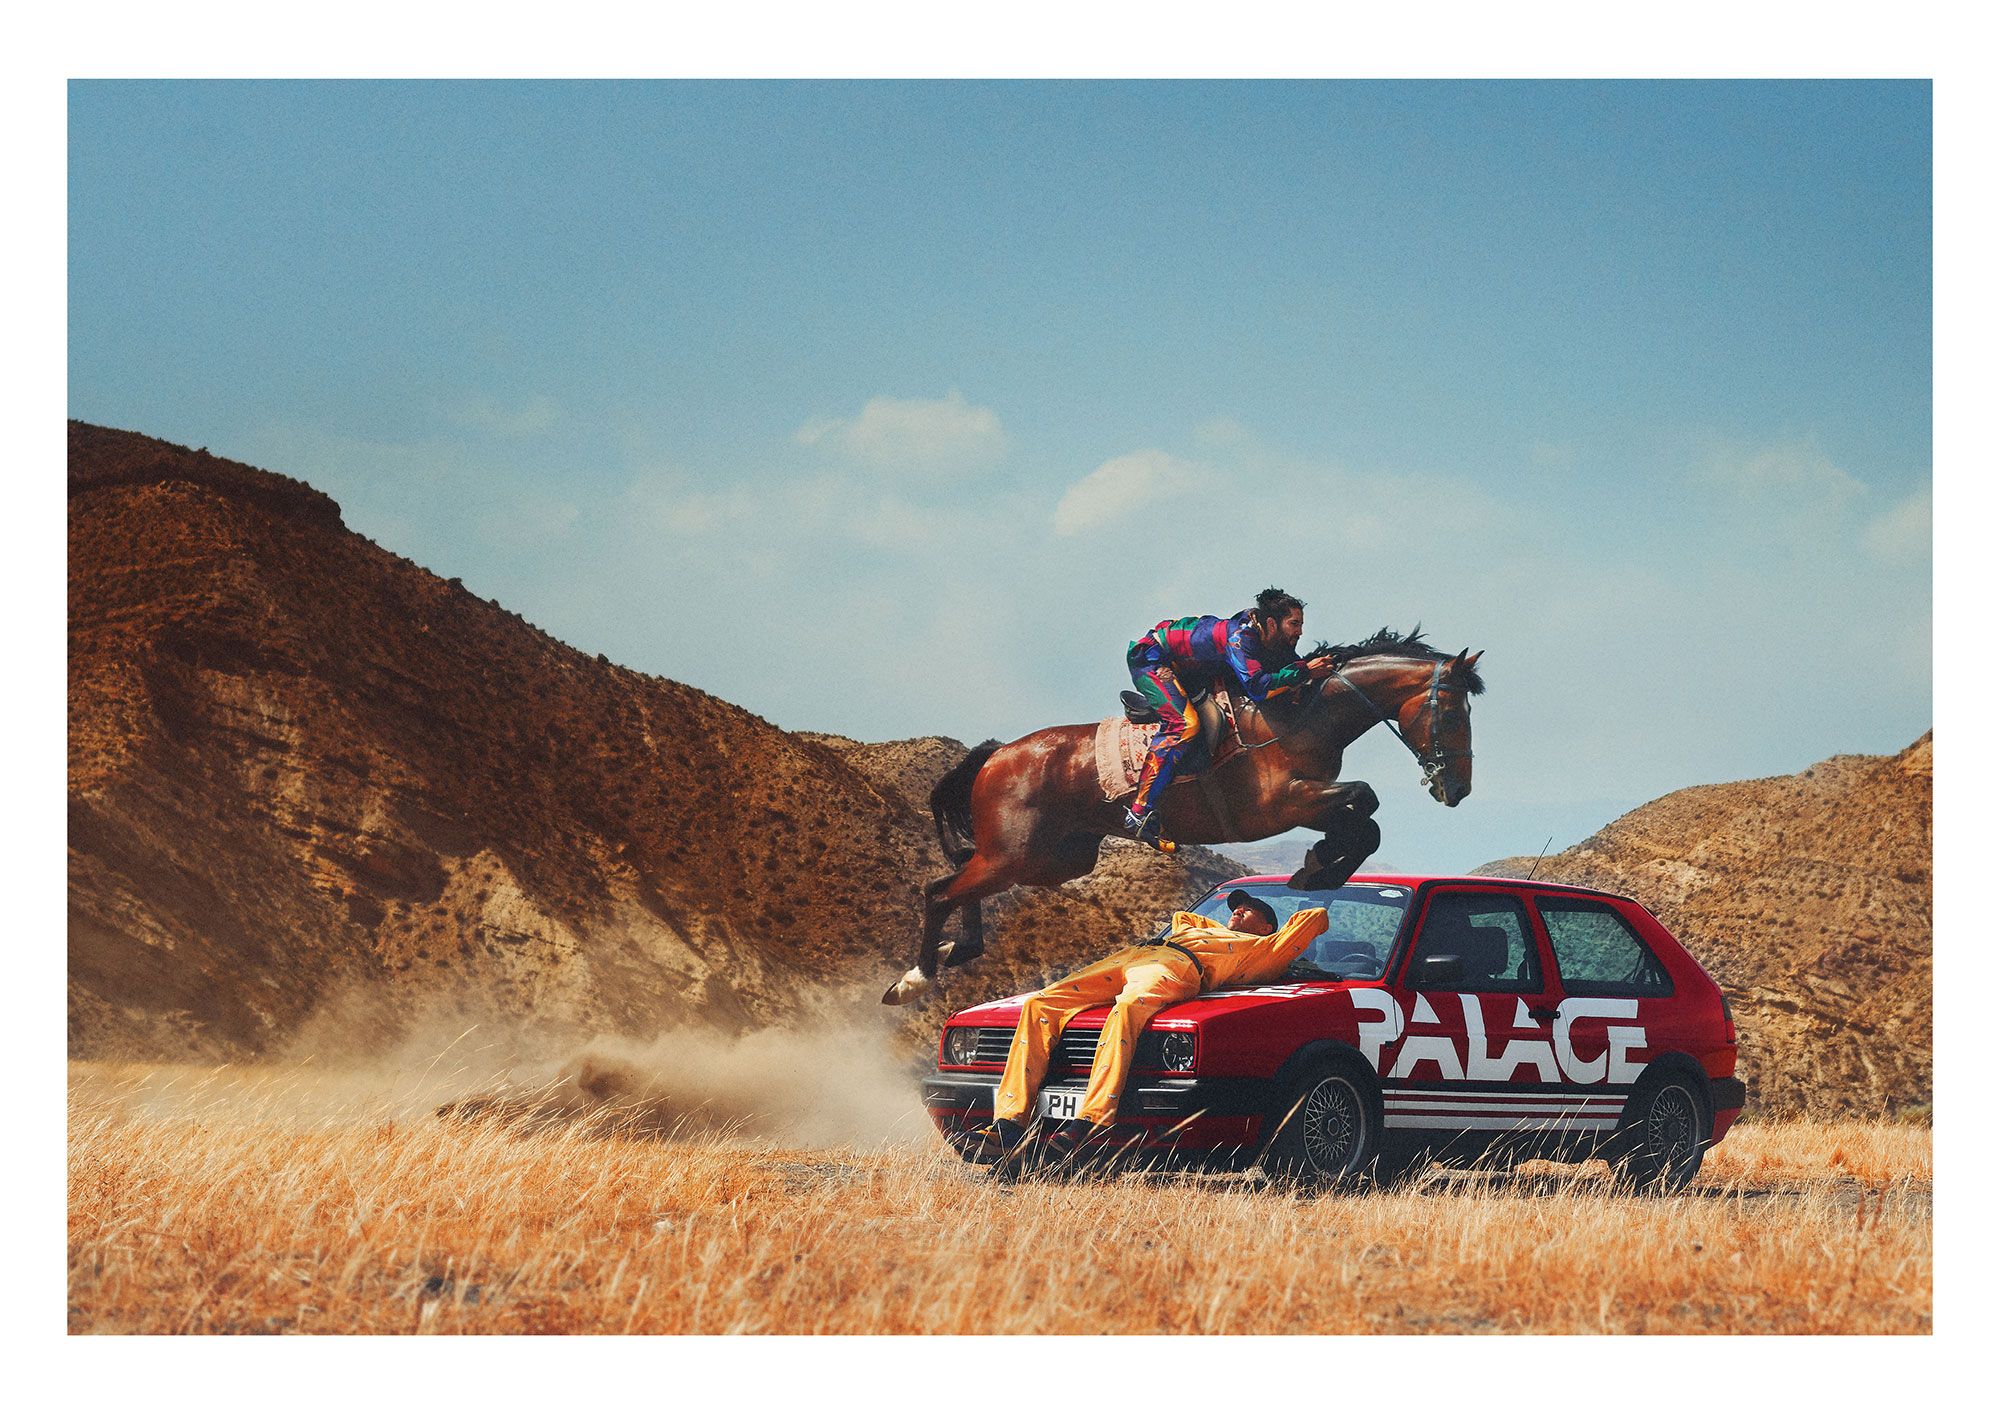 Palace Ralph Lauren's New Lookbook Brings Skate Vibes to the Dusty